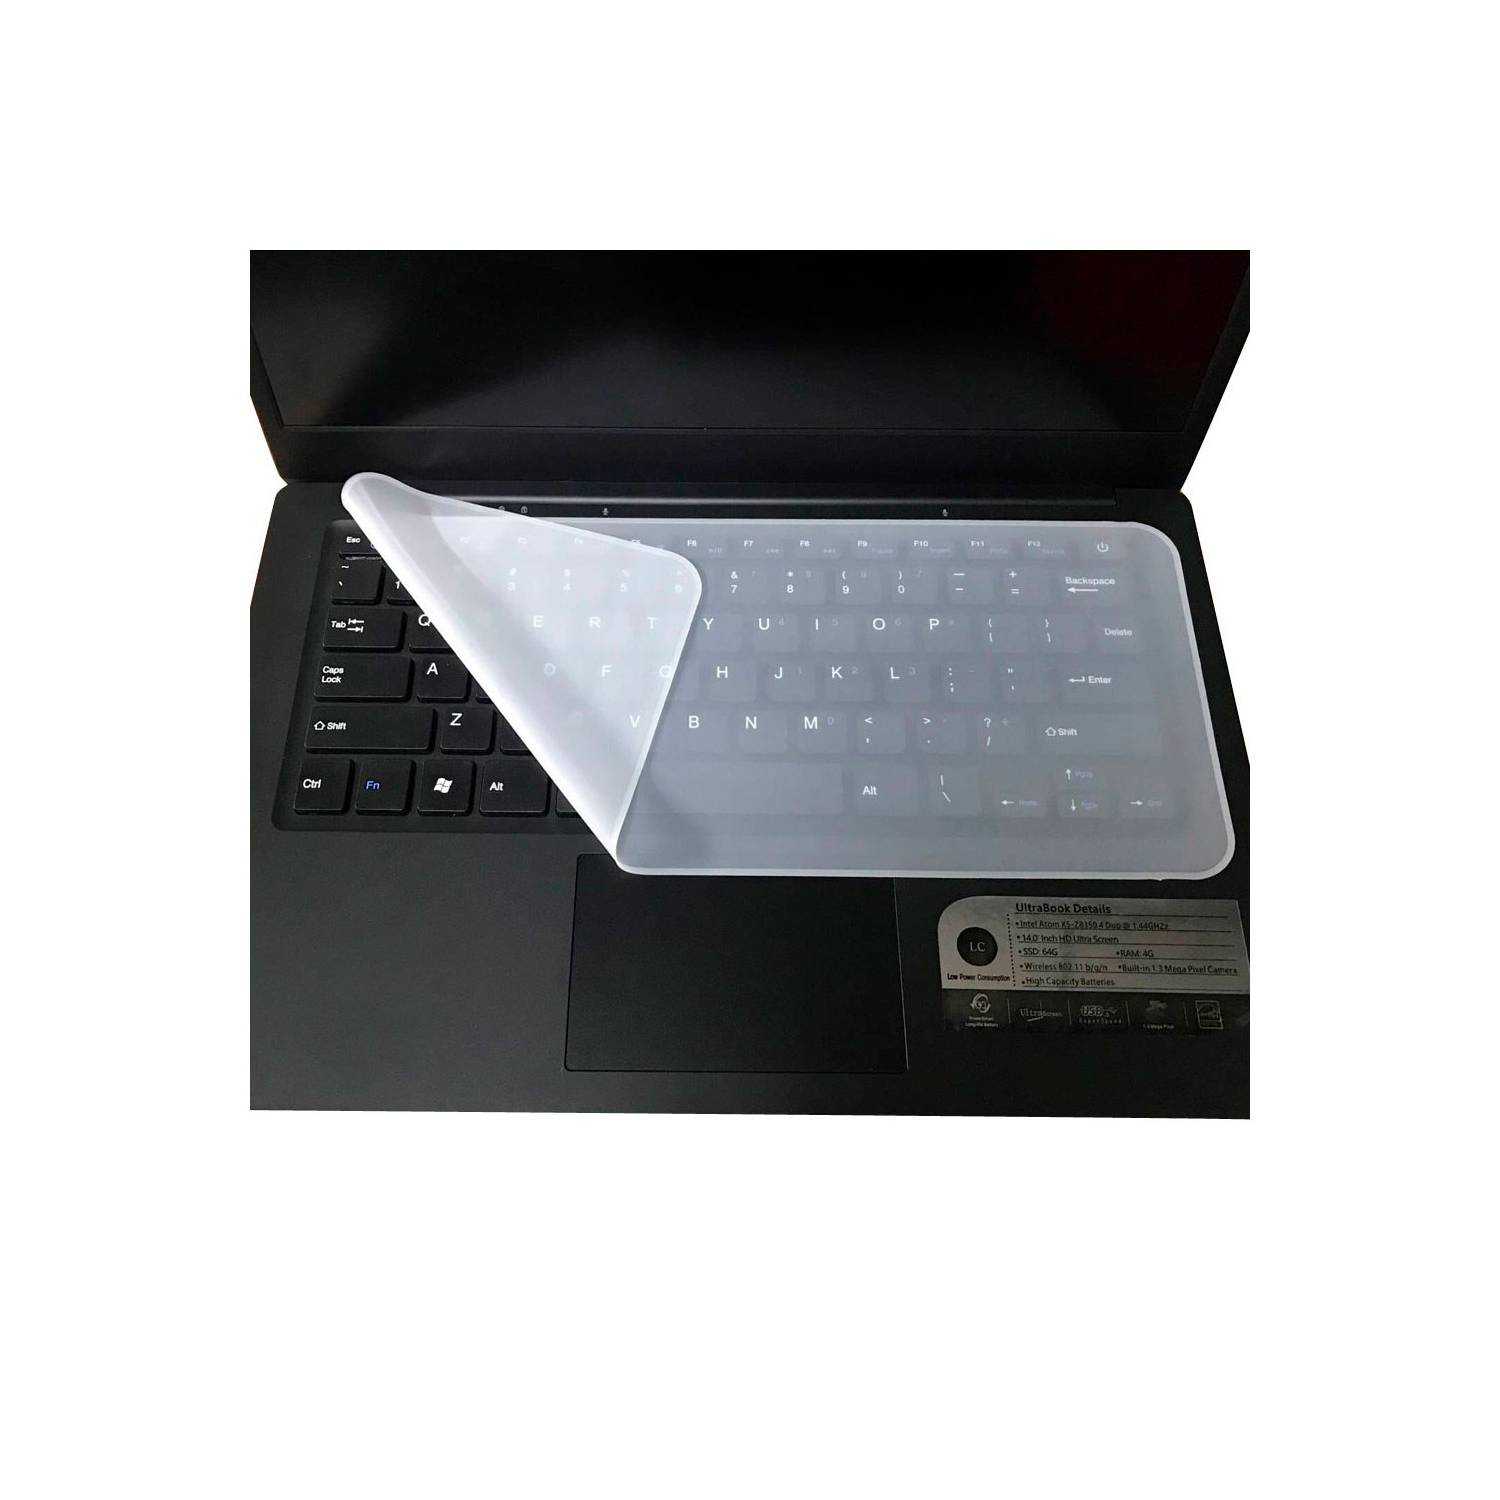 OEM Protector Teclado Notebook Pc Silicona Impermeable